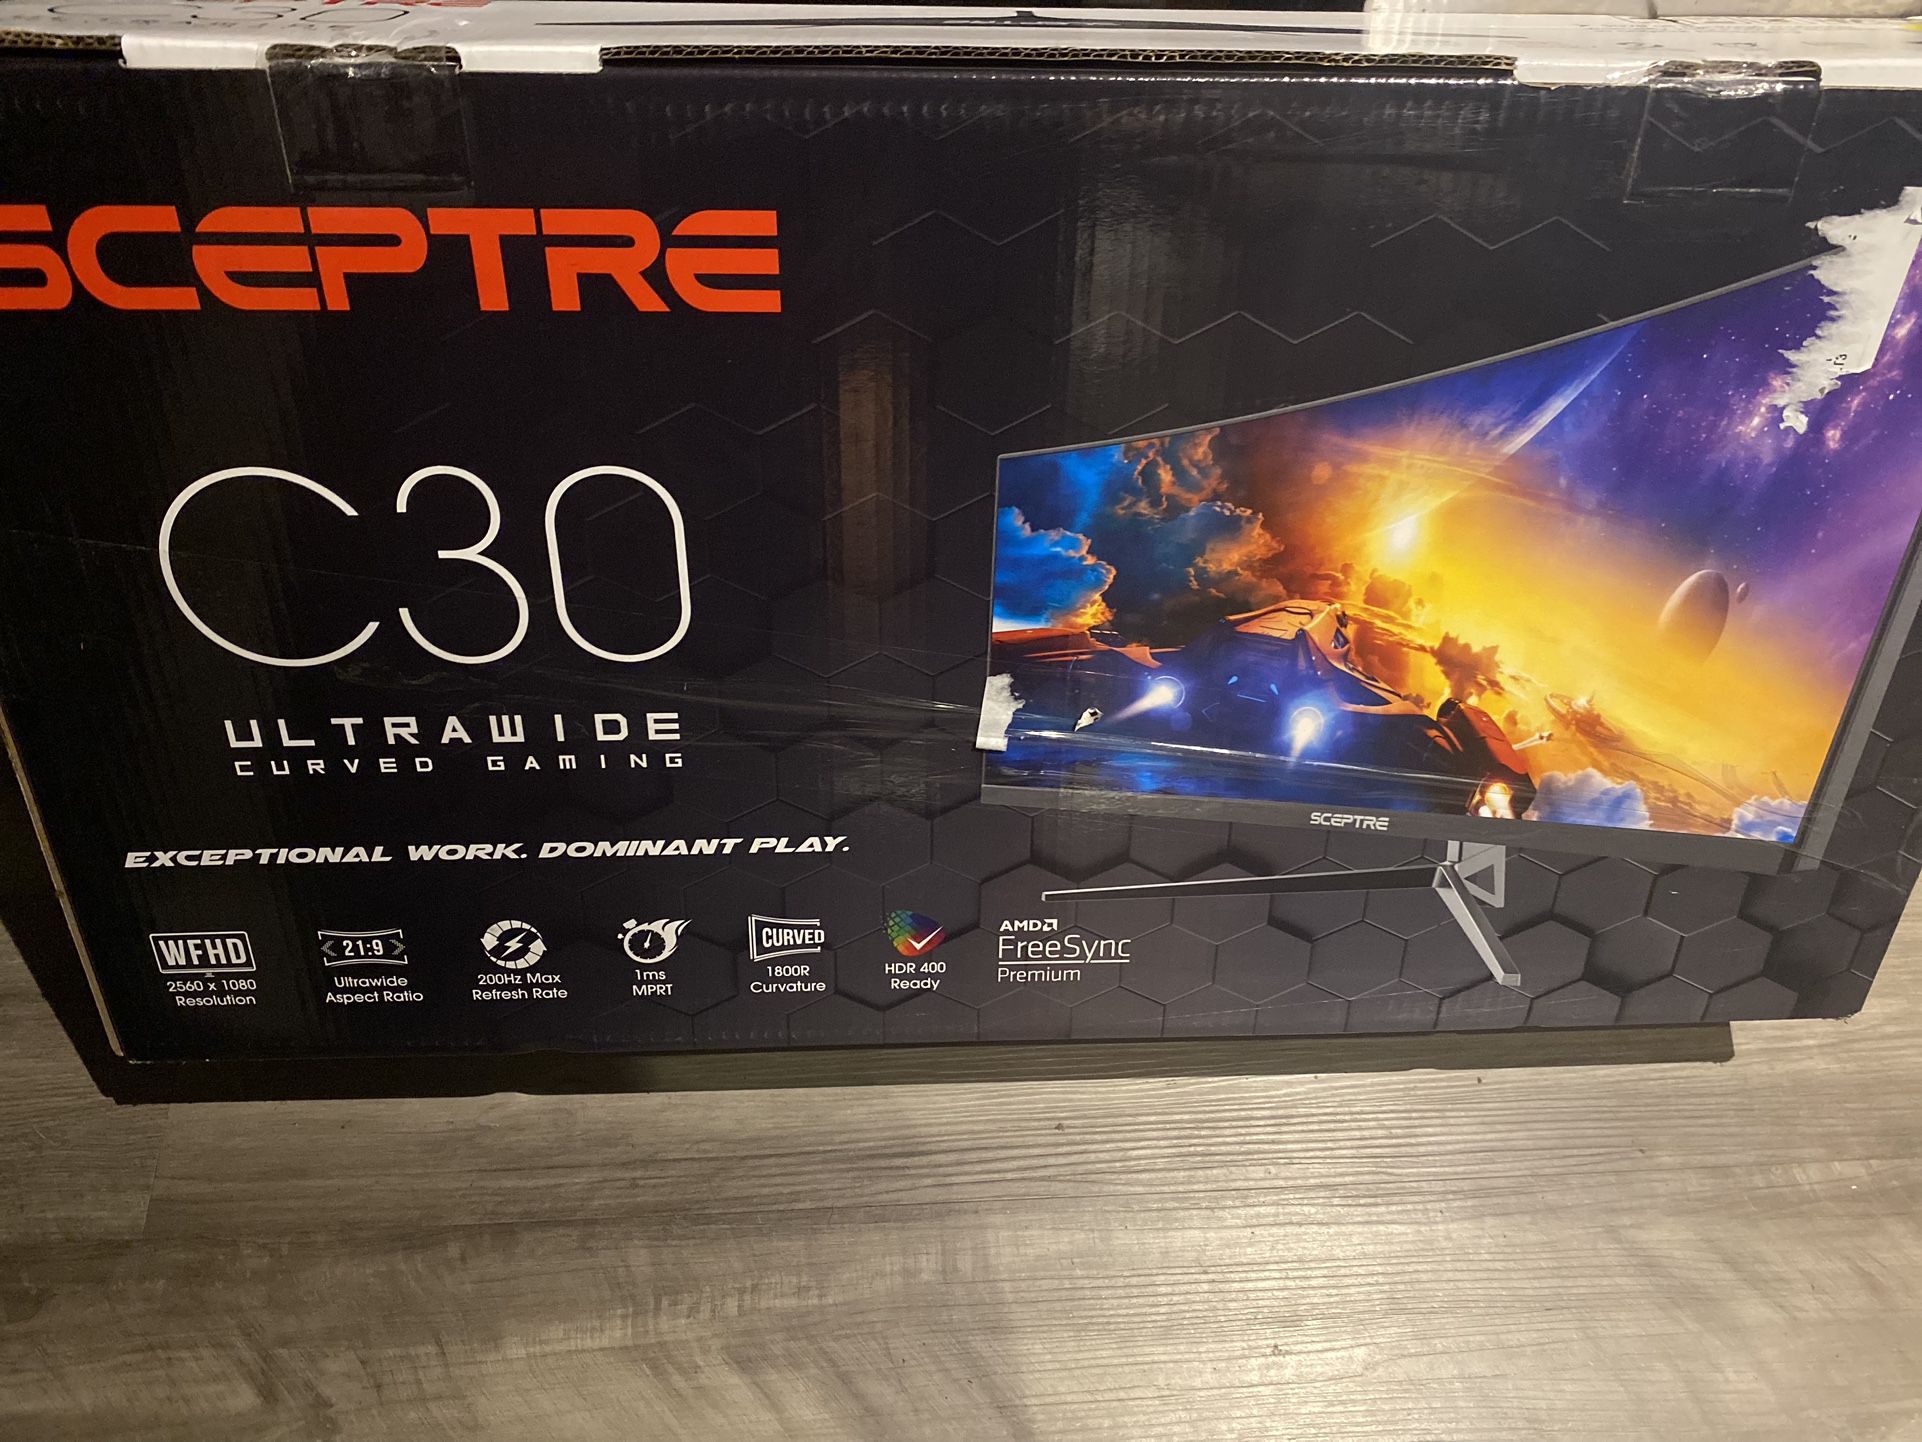 Sceptre  C30  Curved Gaming Monitor 